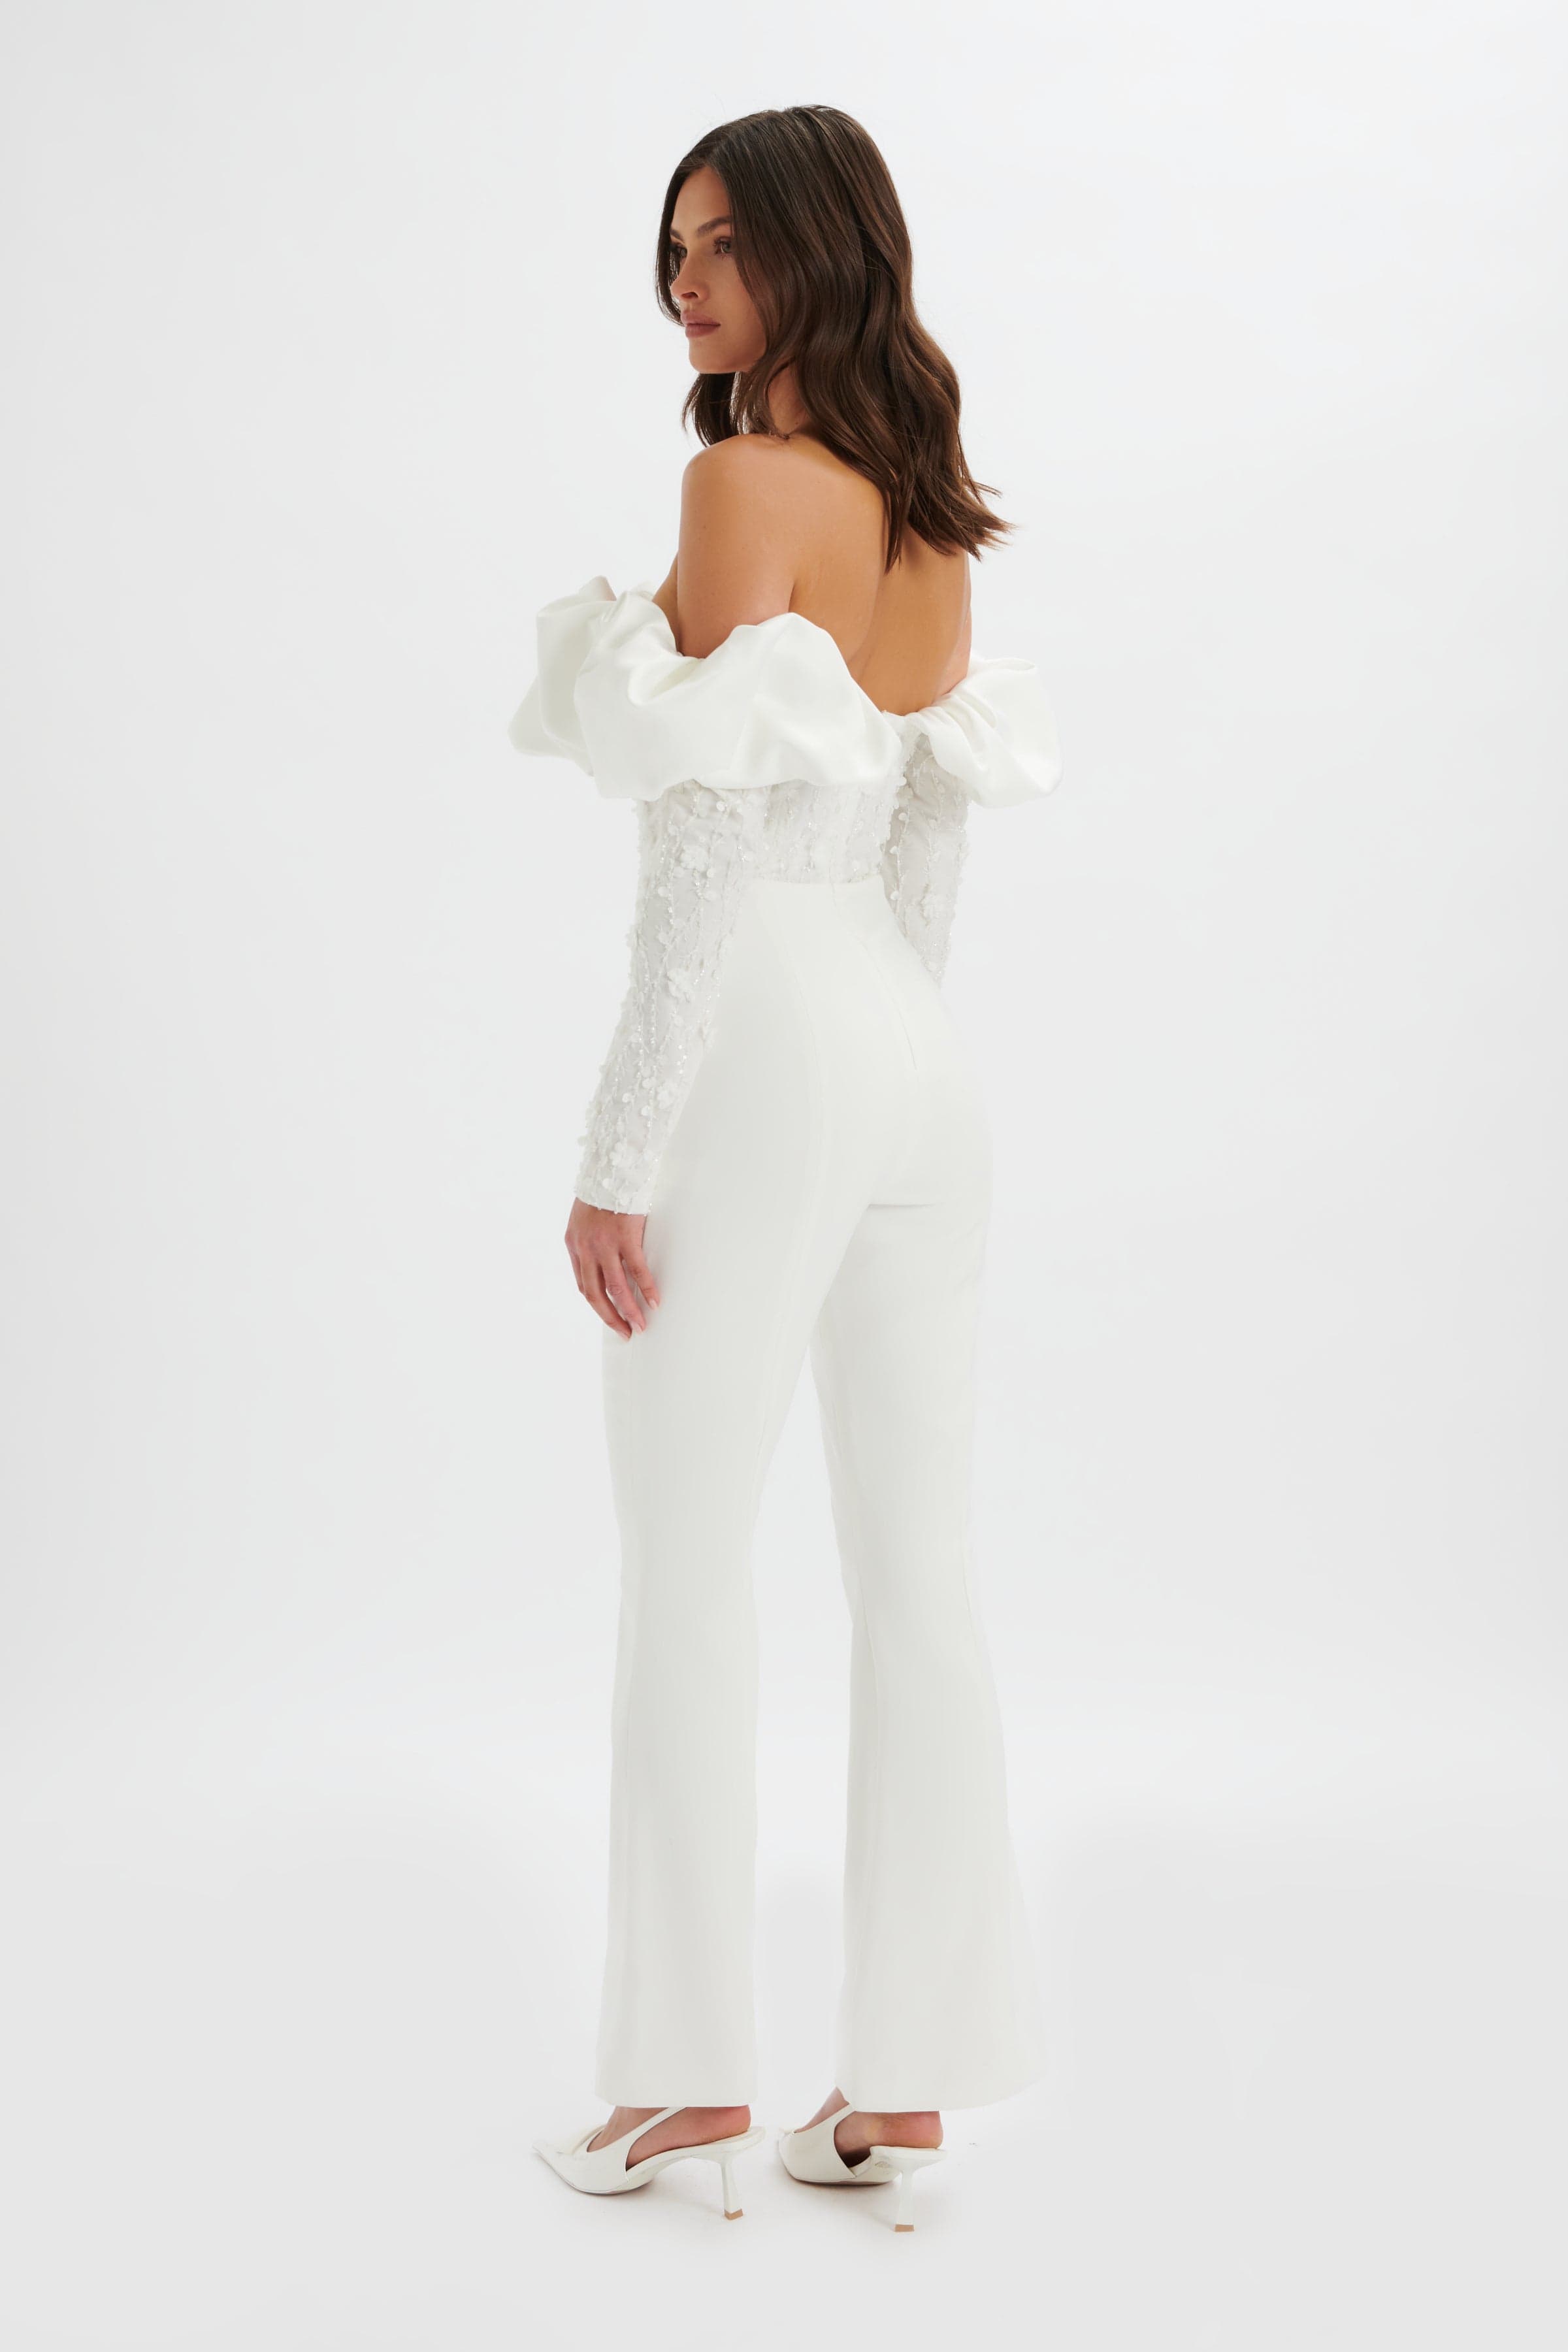 TALLULAH 3D Embroidered Satin Puff Jumpsuit in White